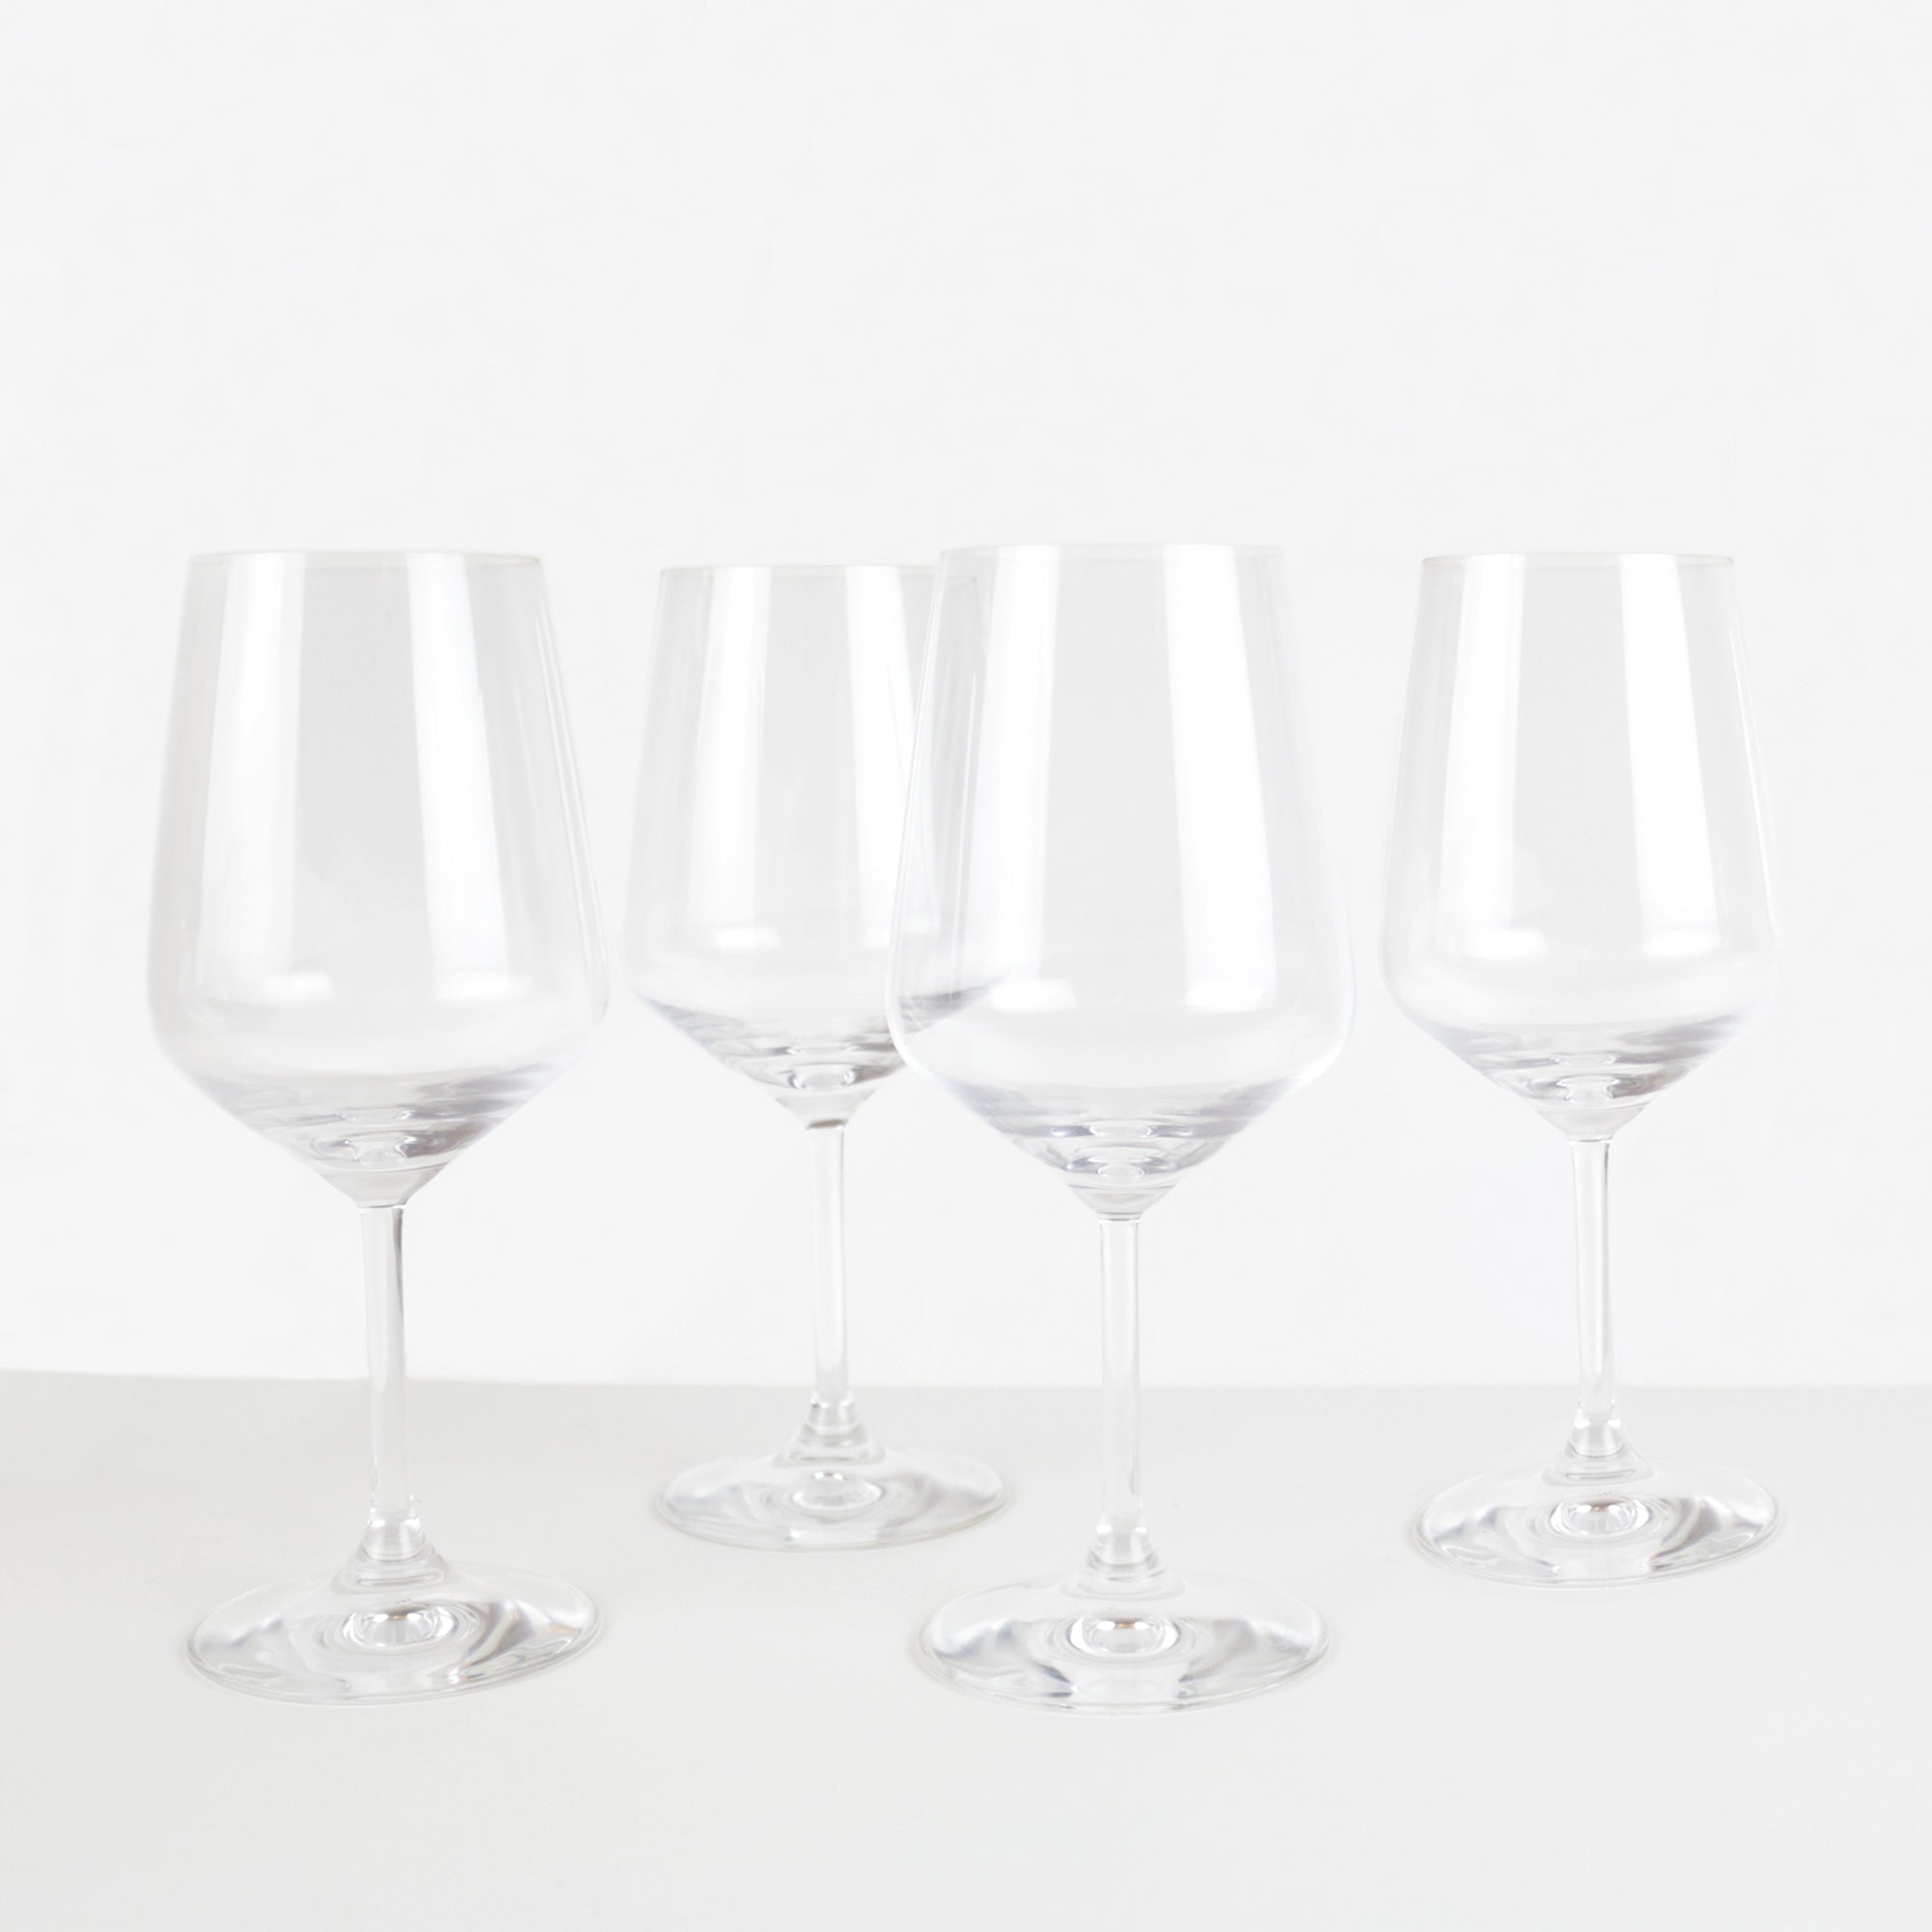 Spiegelau Universal Crystal Glass (Set of 4) - The Store